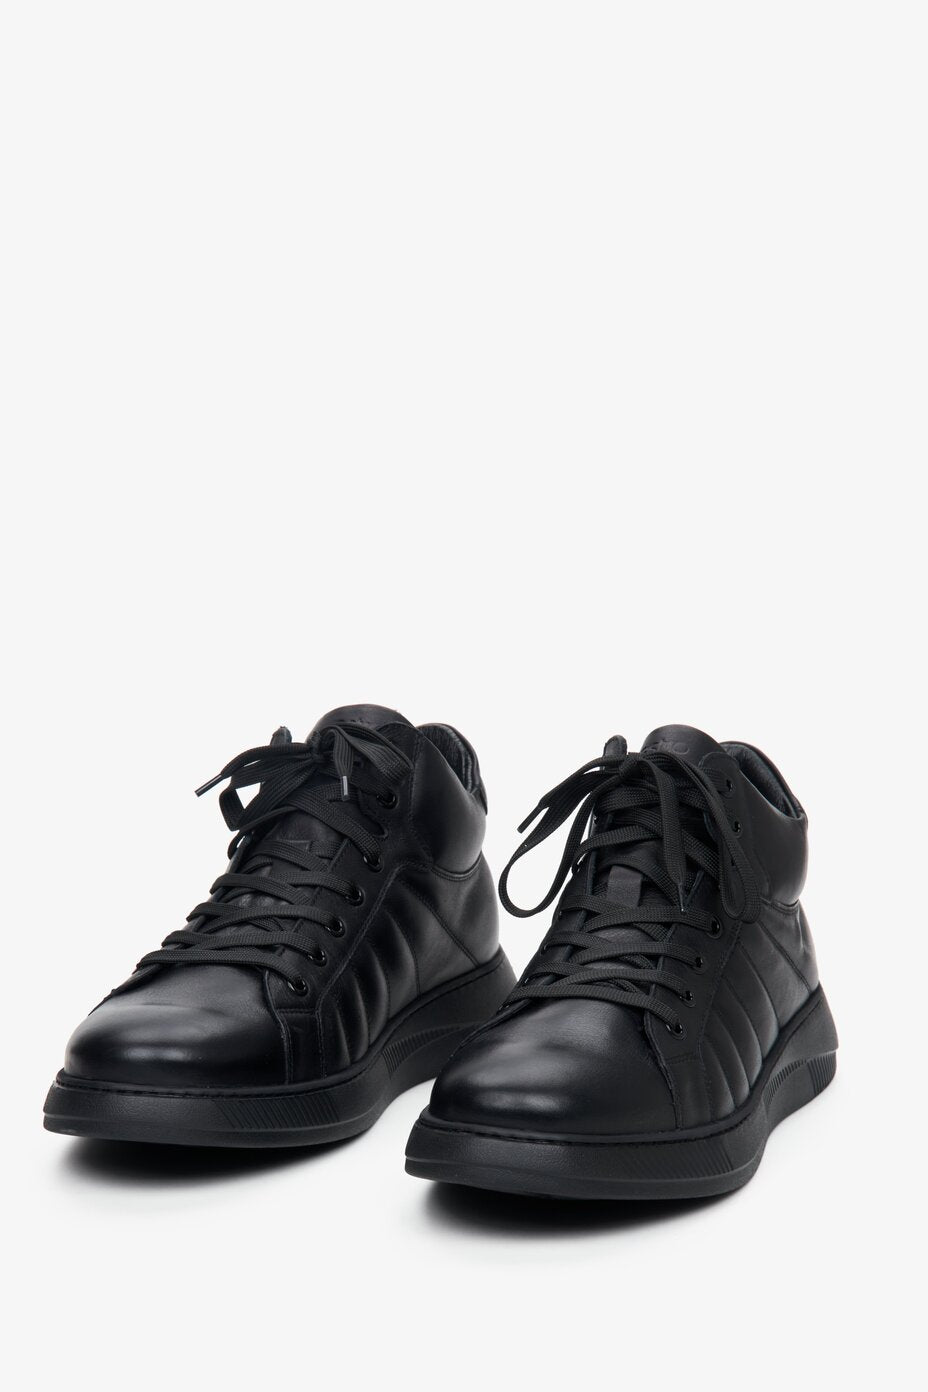 High-top men's sneakers made of genuine black leather with laces by Estro - front view.